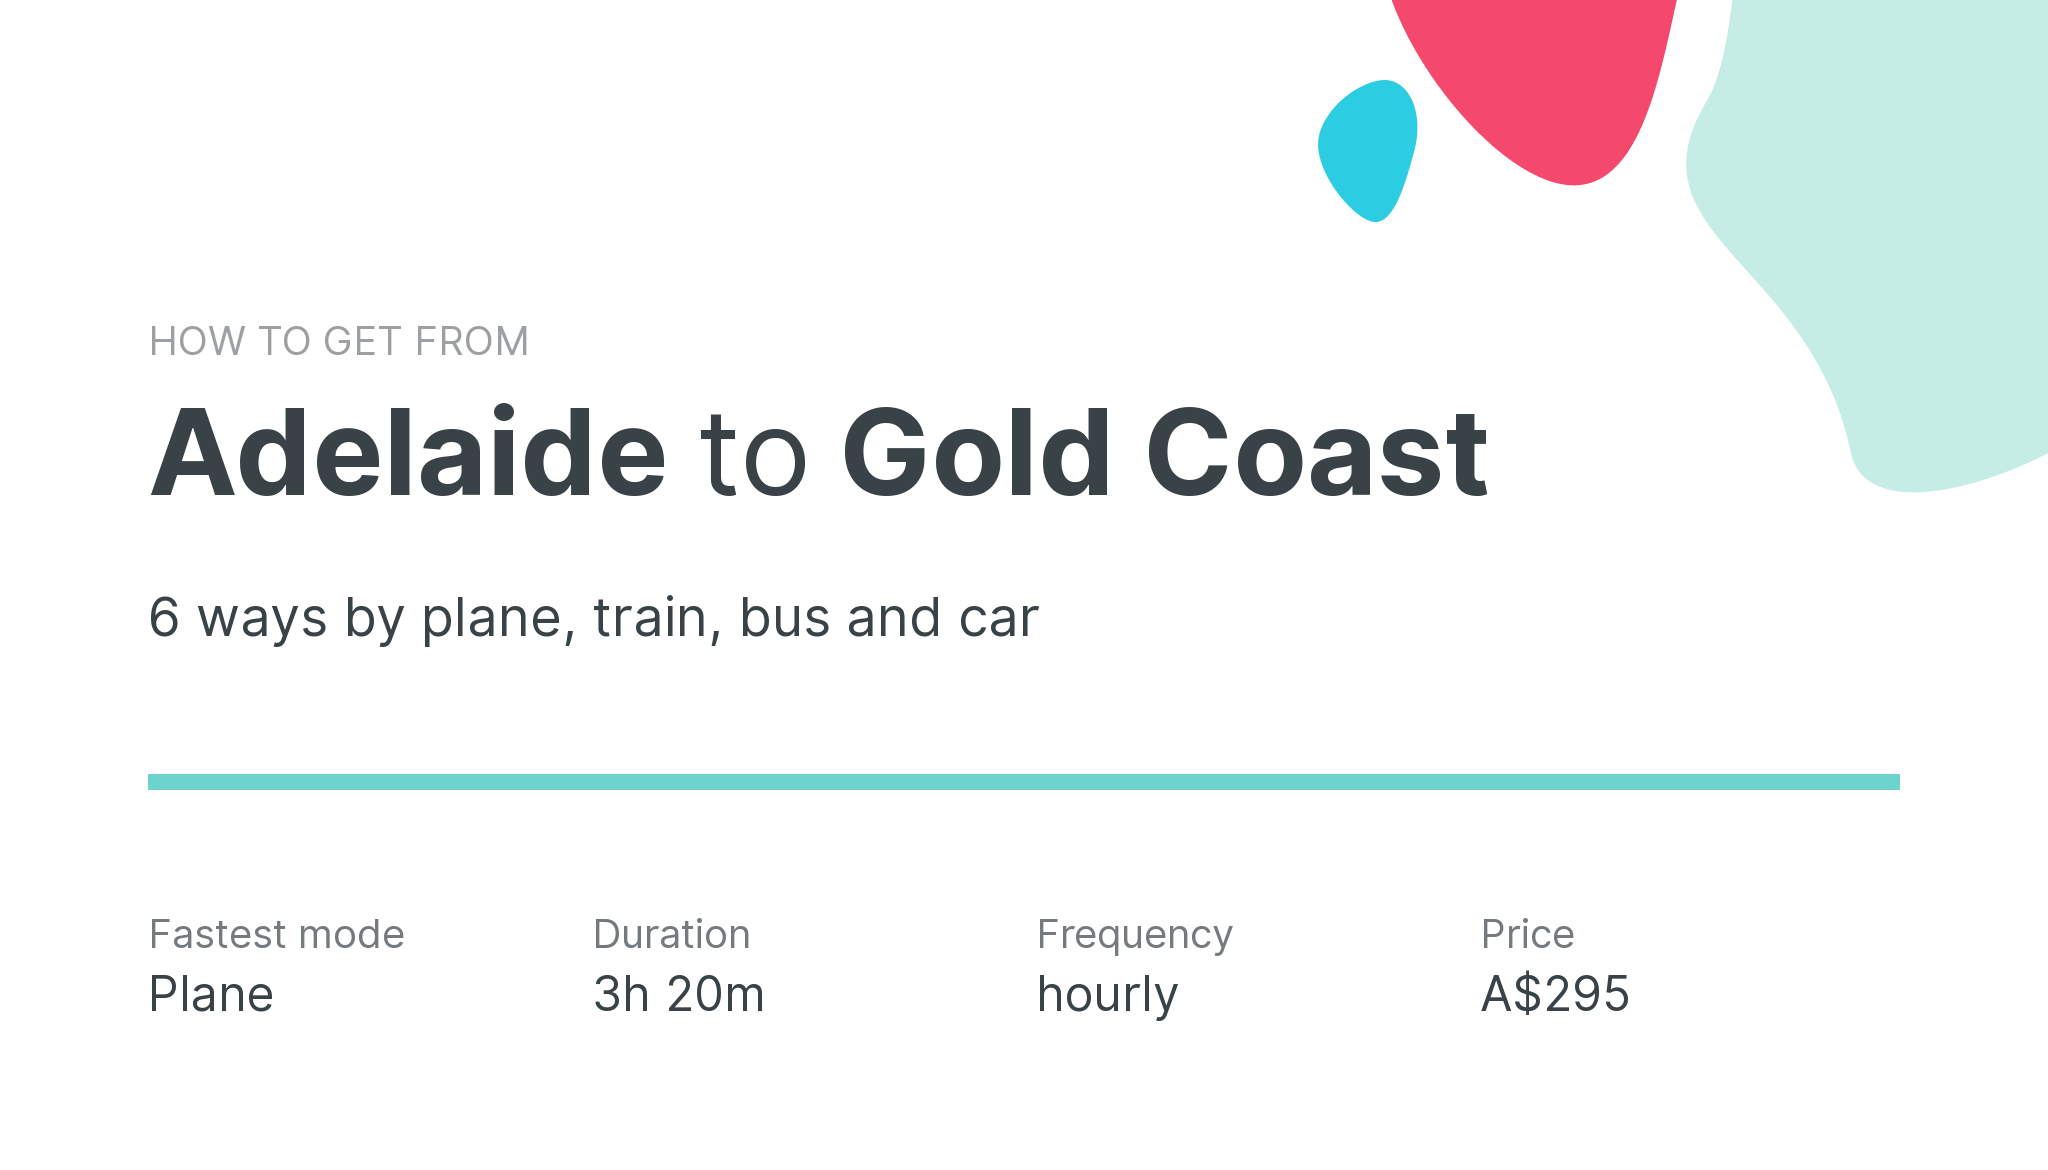 How do I get from Adelaide to Gold Coast